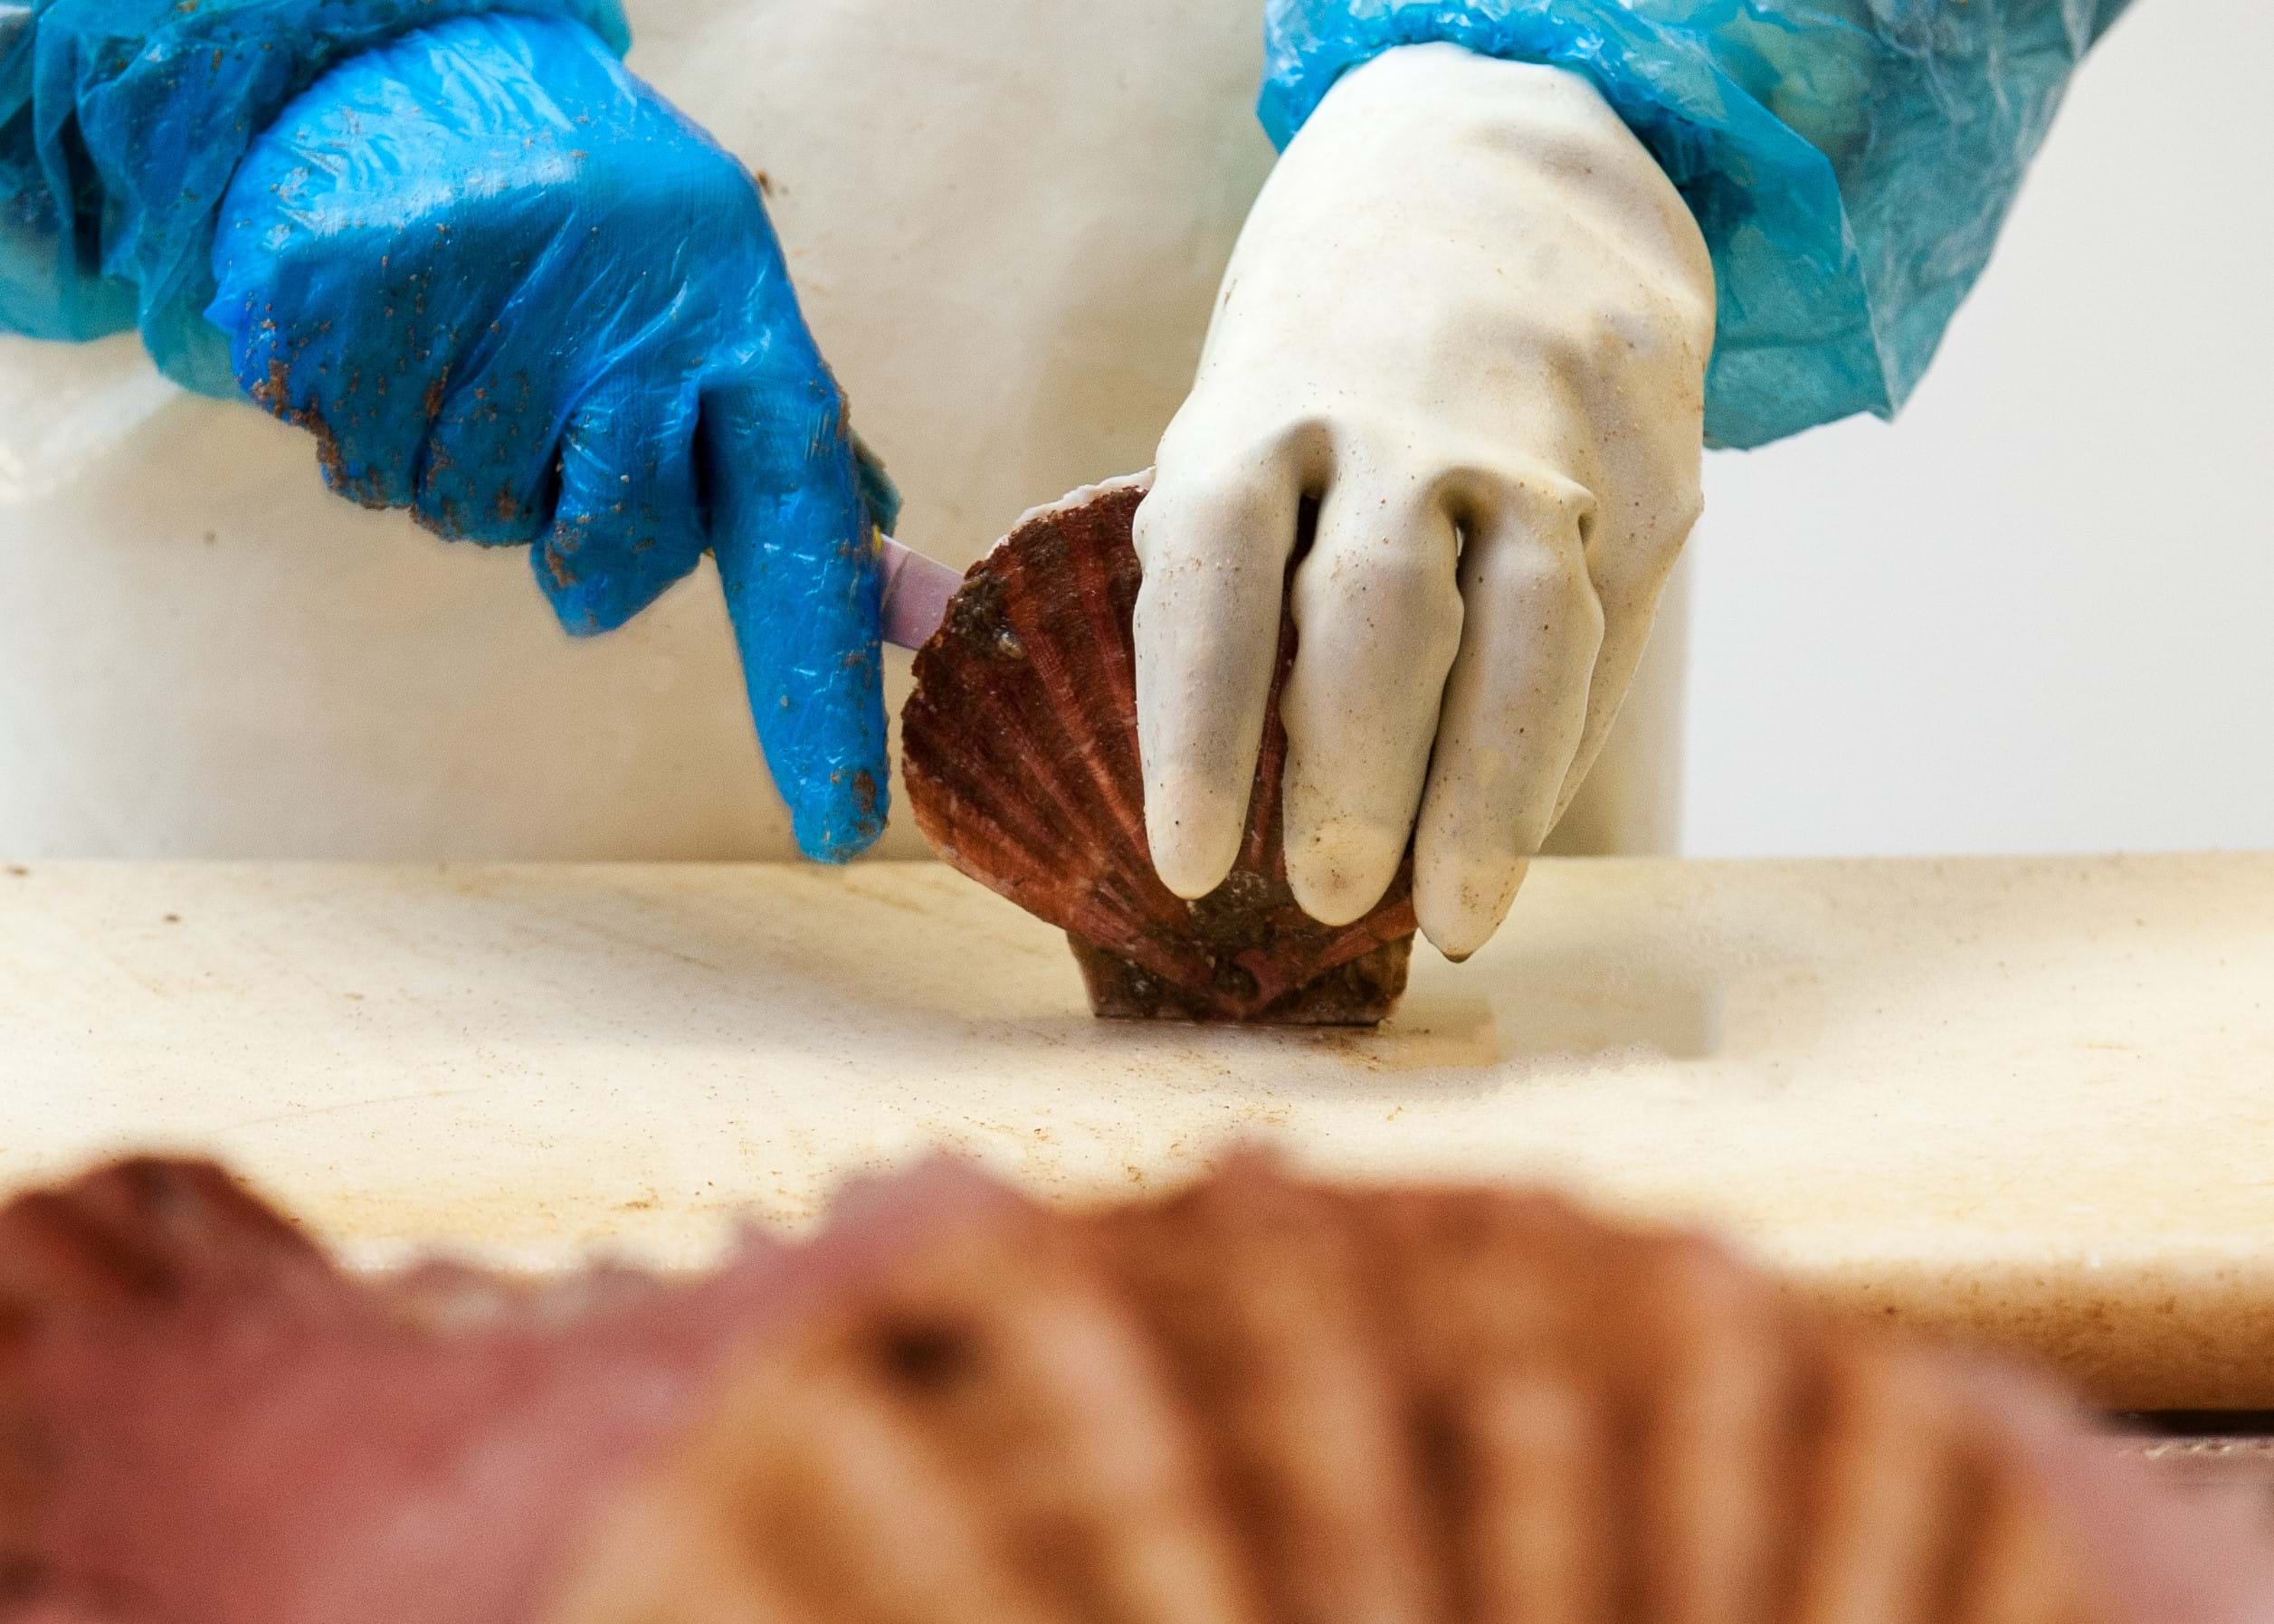 Photo features a pair of hands cutting a scallop shell with a knife.